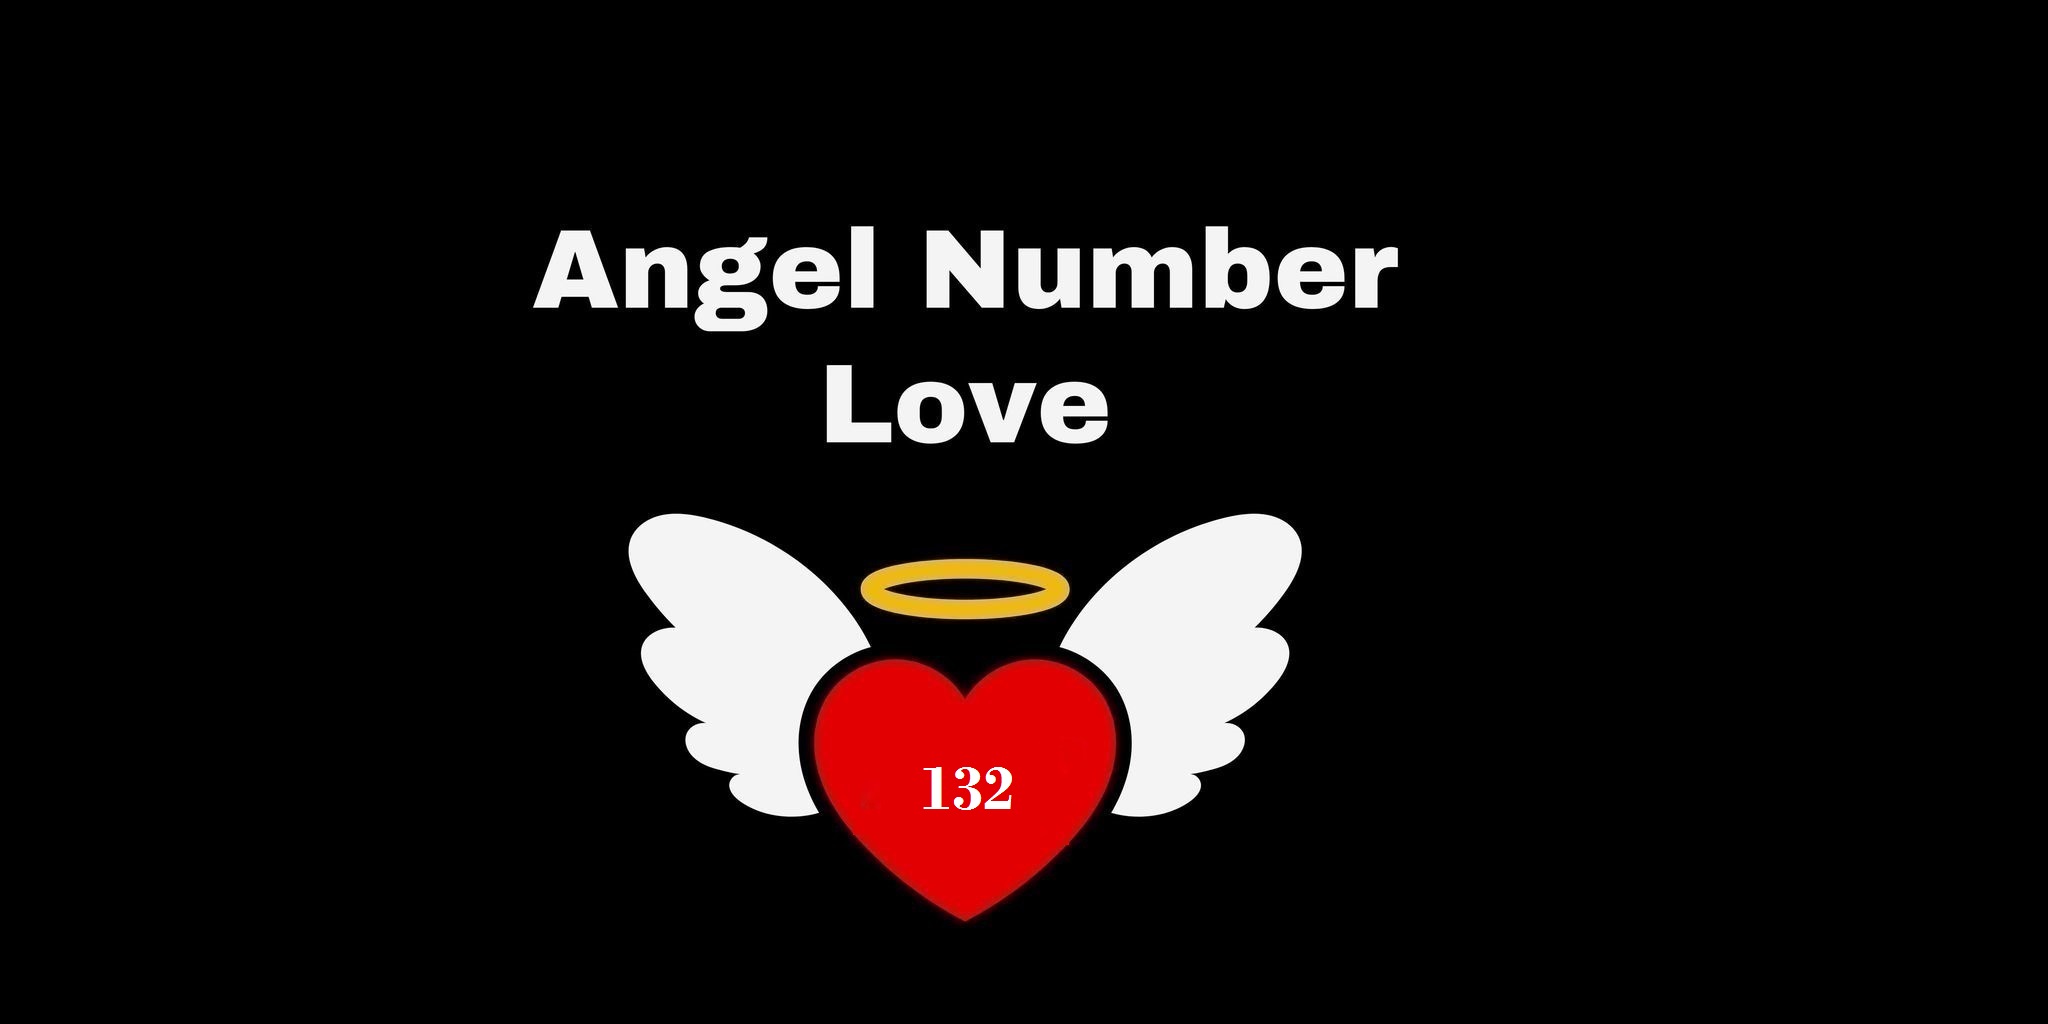 132 Angel Number Meaning In Love